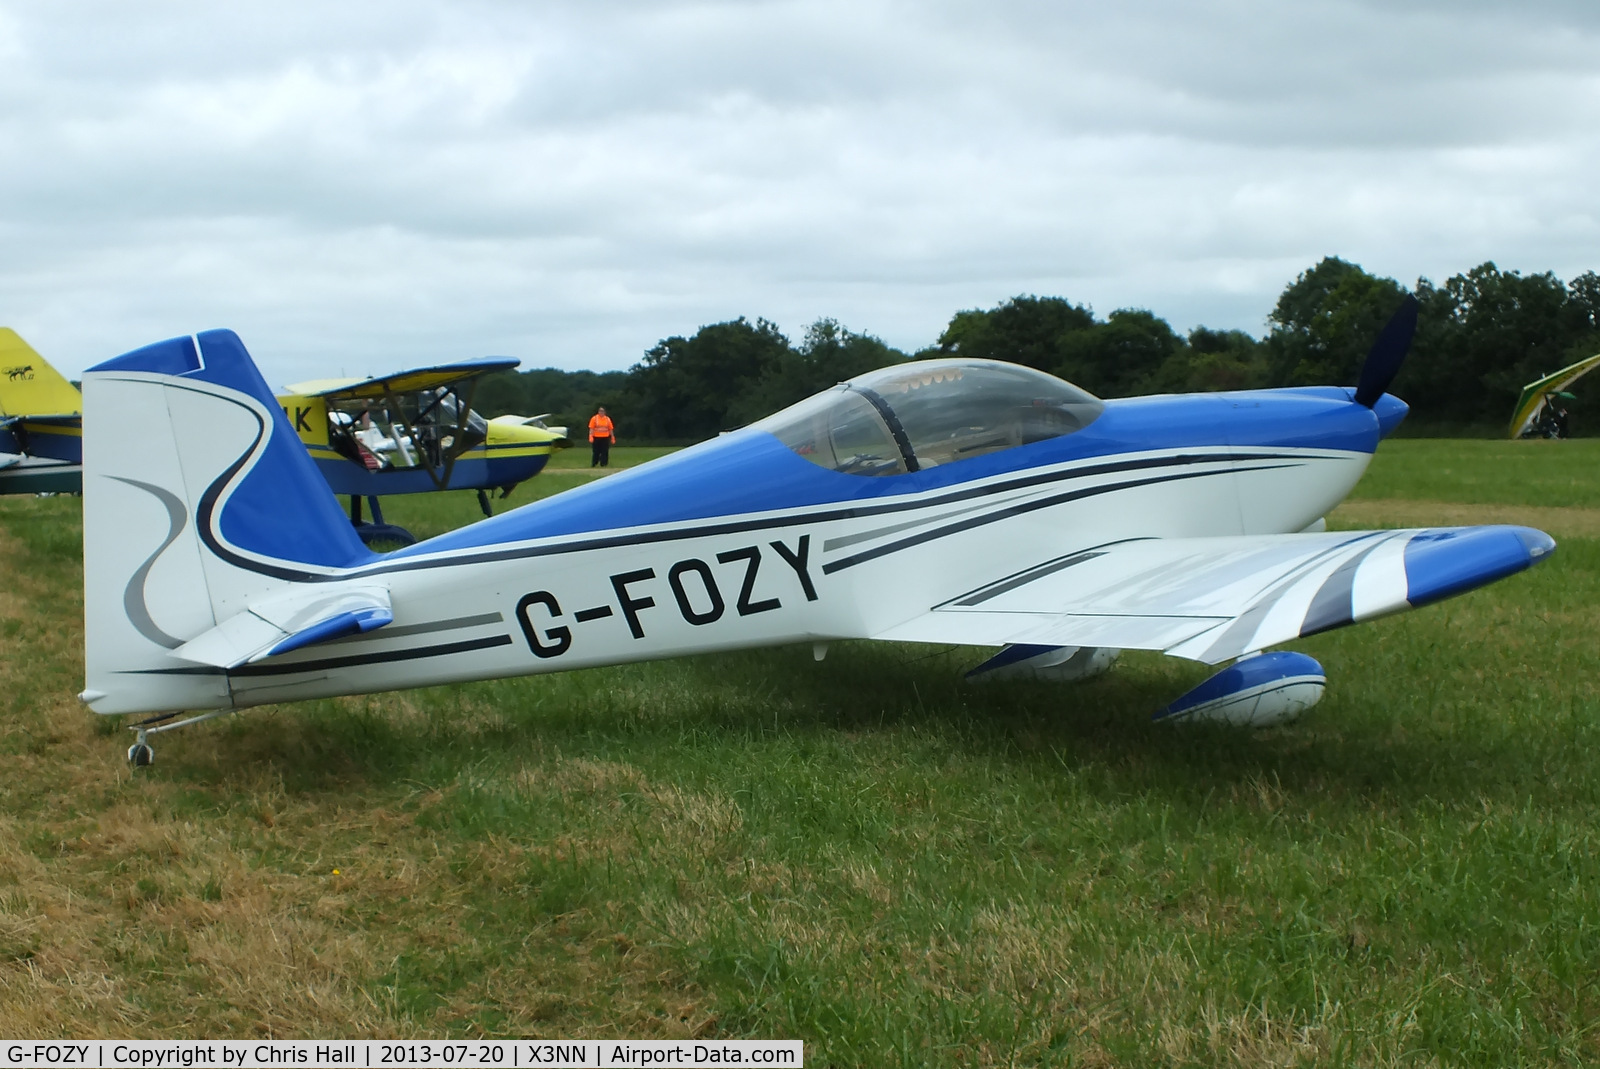 G-FOZY, 2012 Vans RV-7 C/N PFA 323-14150, at the Stoke Golding stakeout 2013